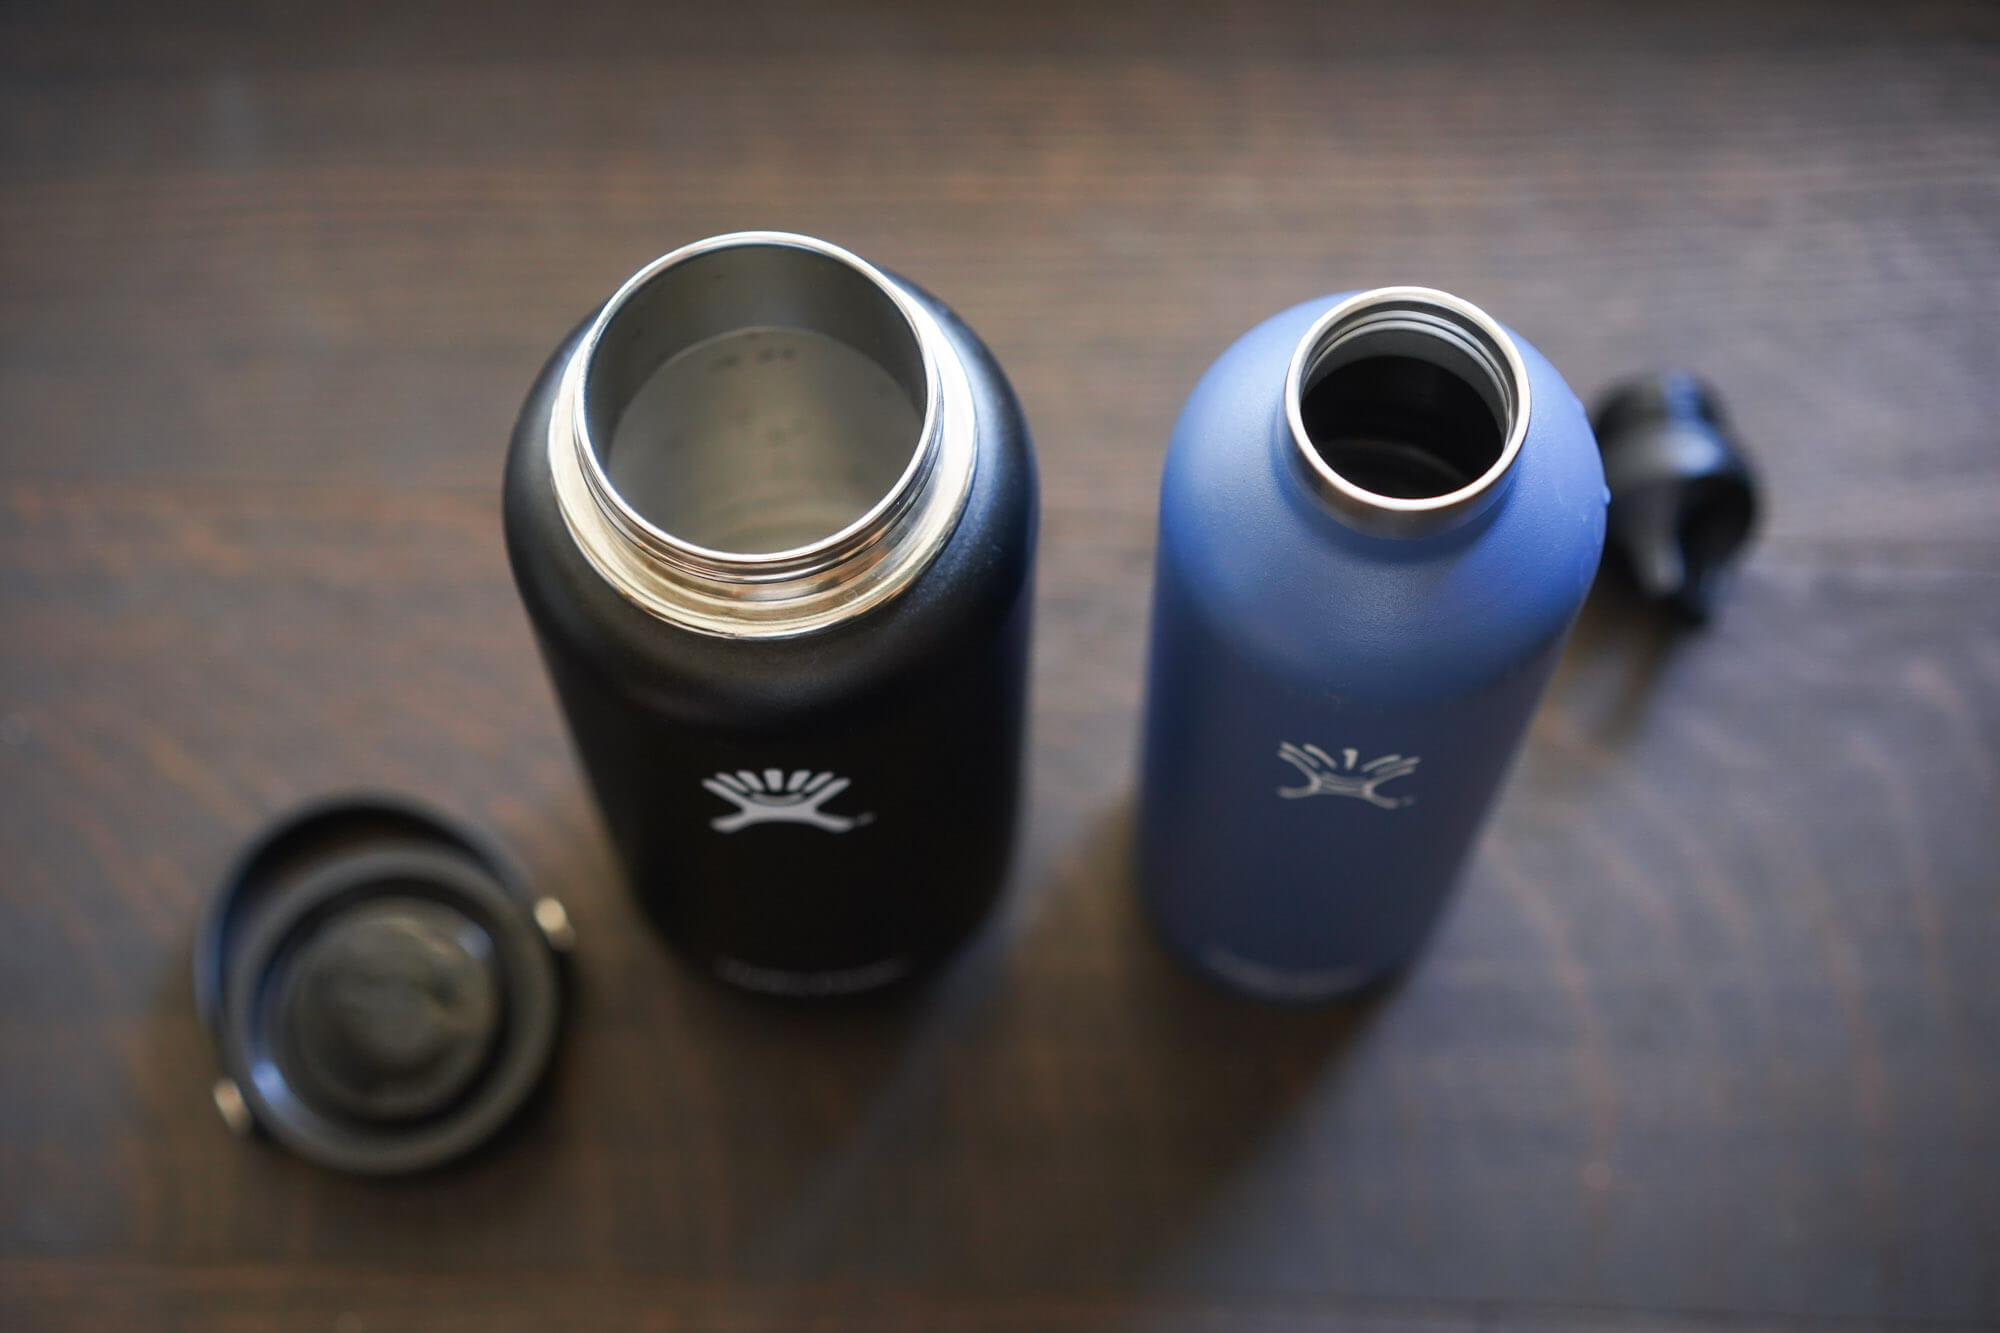 Hydro Flask vs. Yeti: Which Is Better?